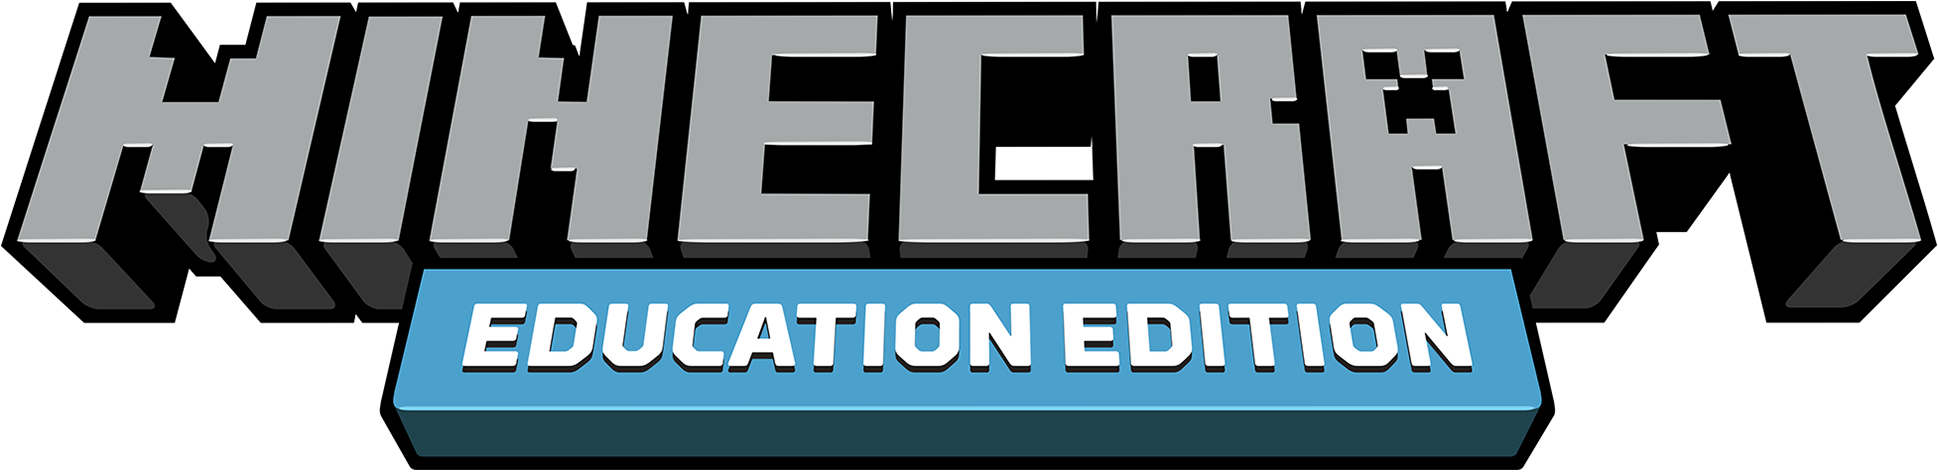 Education Edition early access – Minecraft Wiki